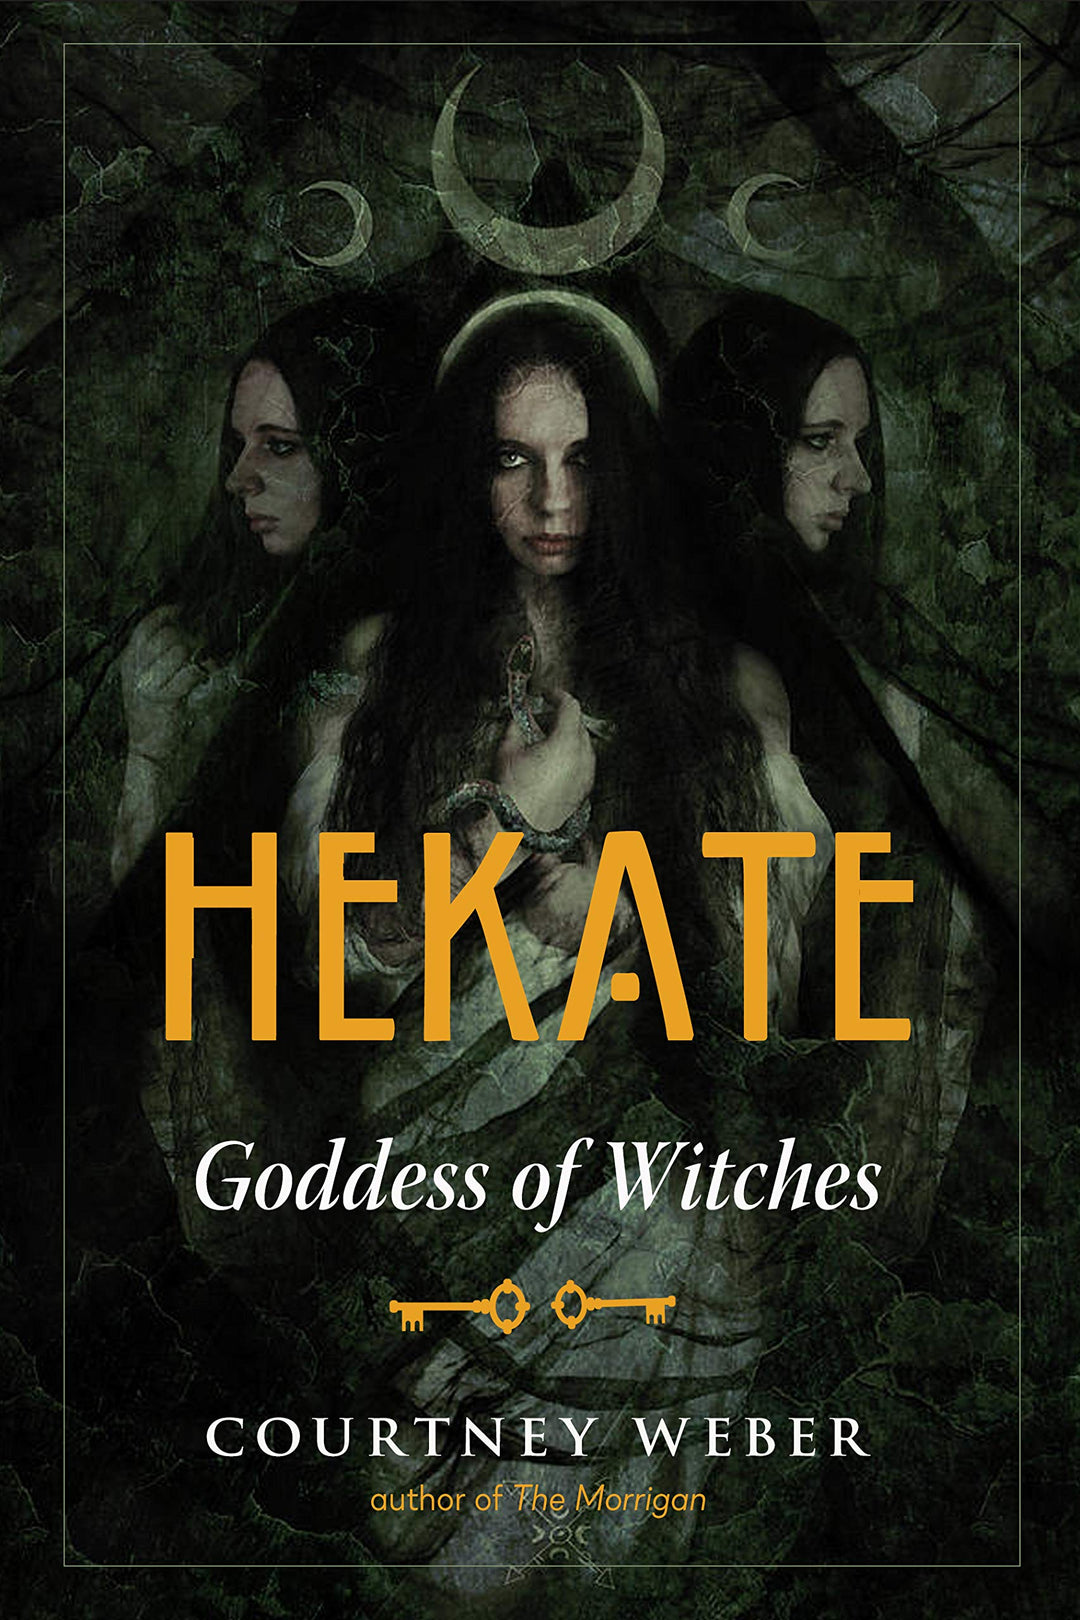 Hekate: Goddess of Witches Paperback by Courtney Weber